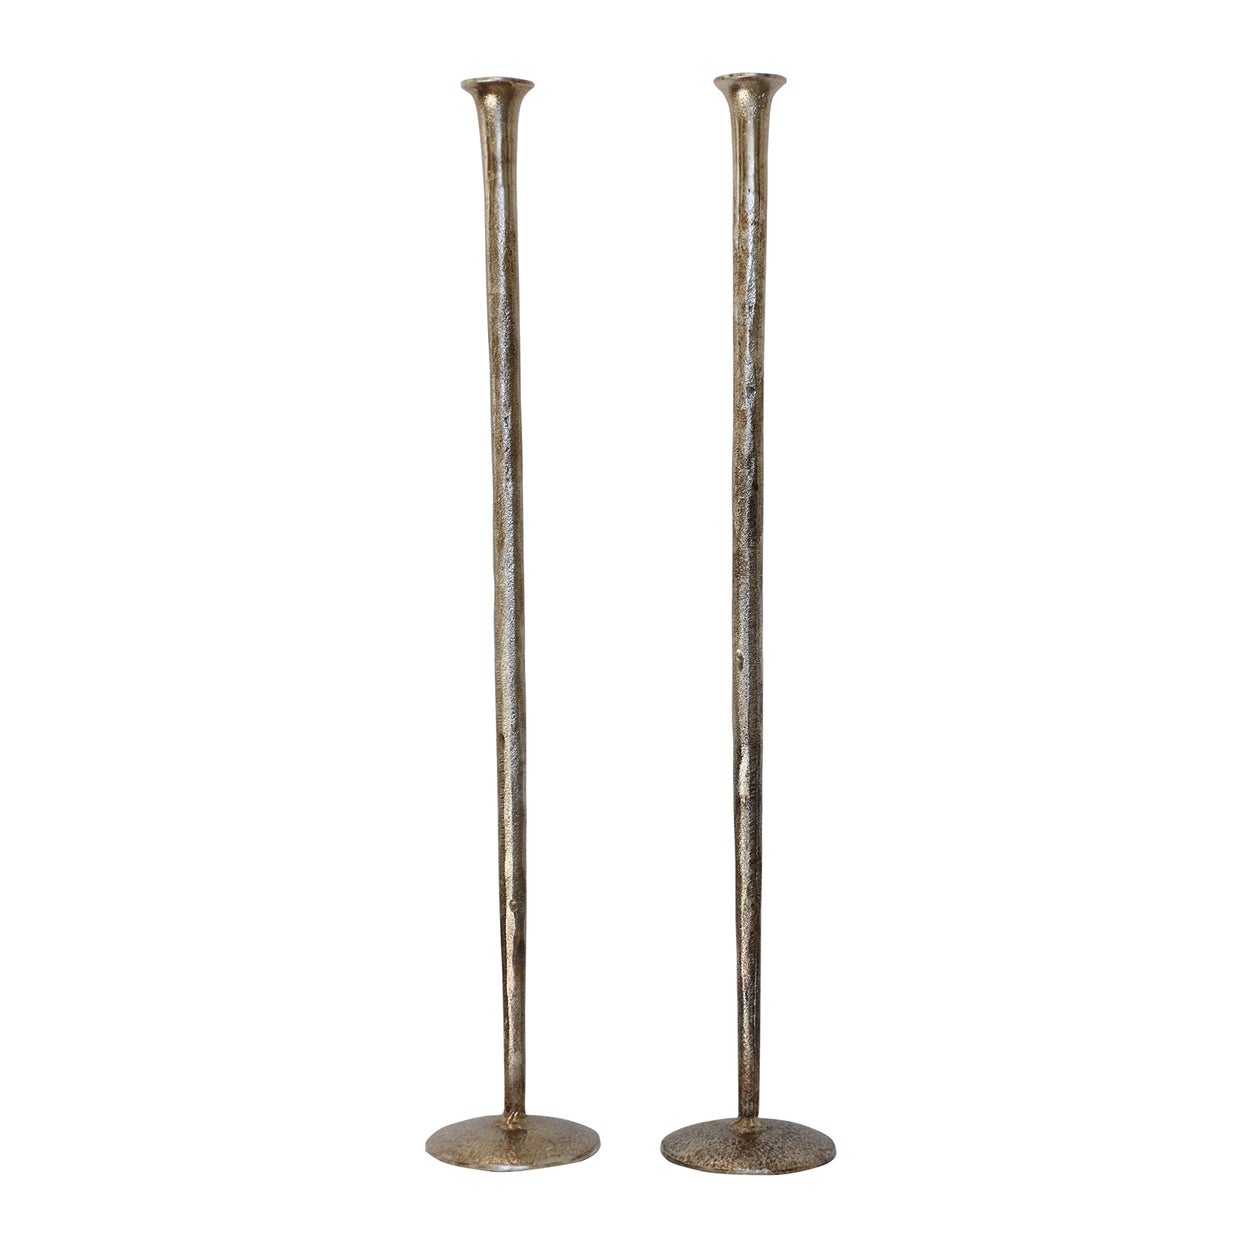 Forged Organic Style Tall Candlestick in Aged Pewter Finish